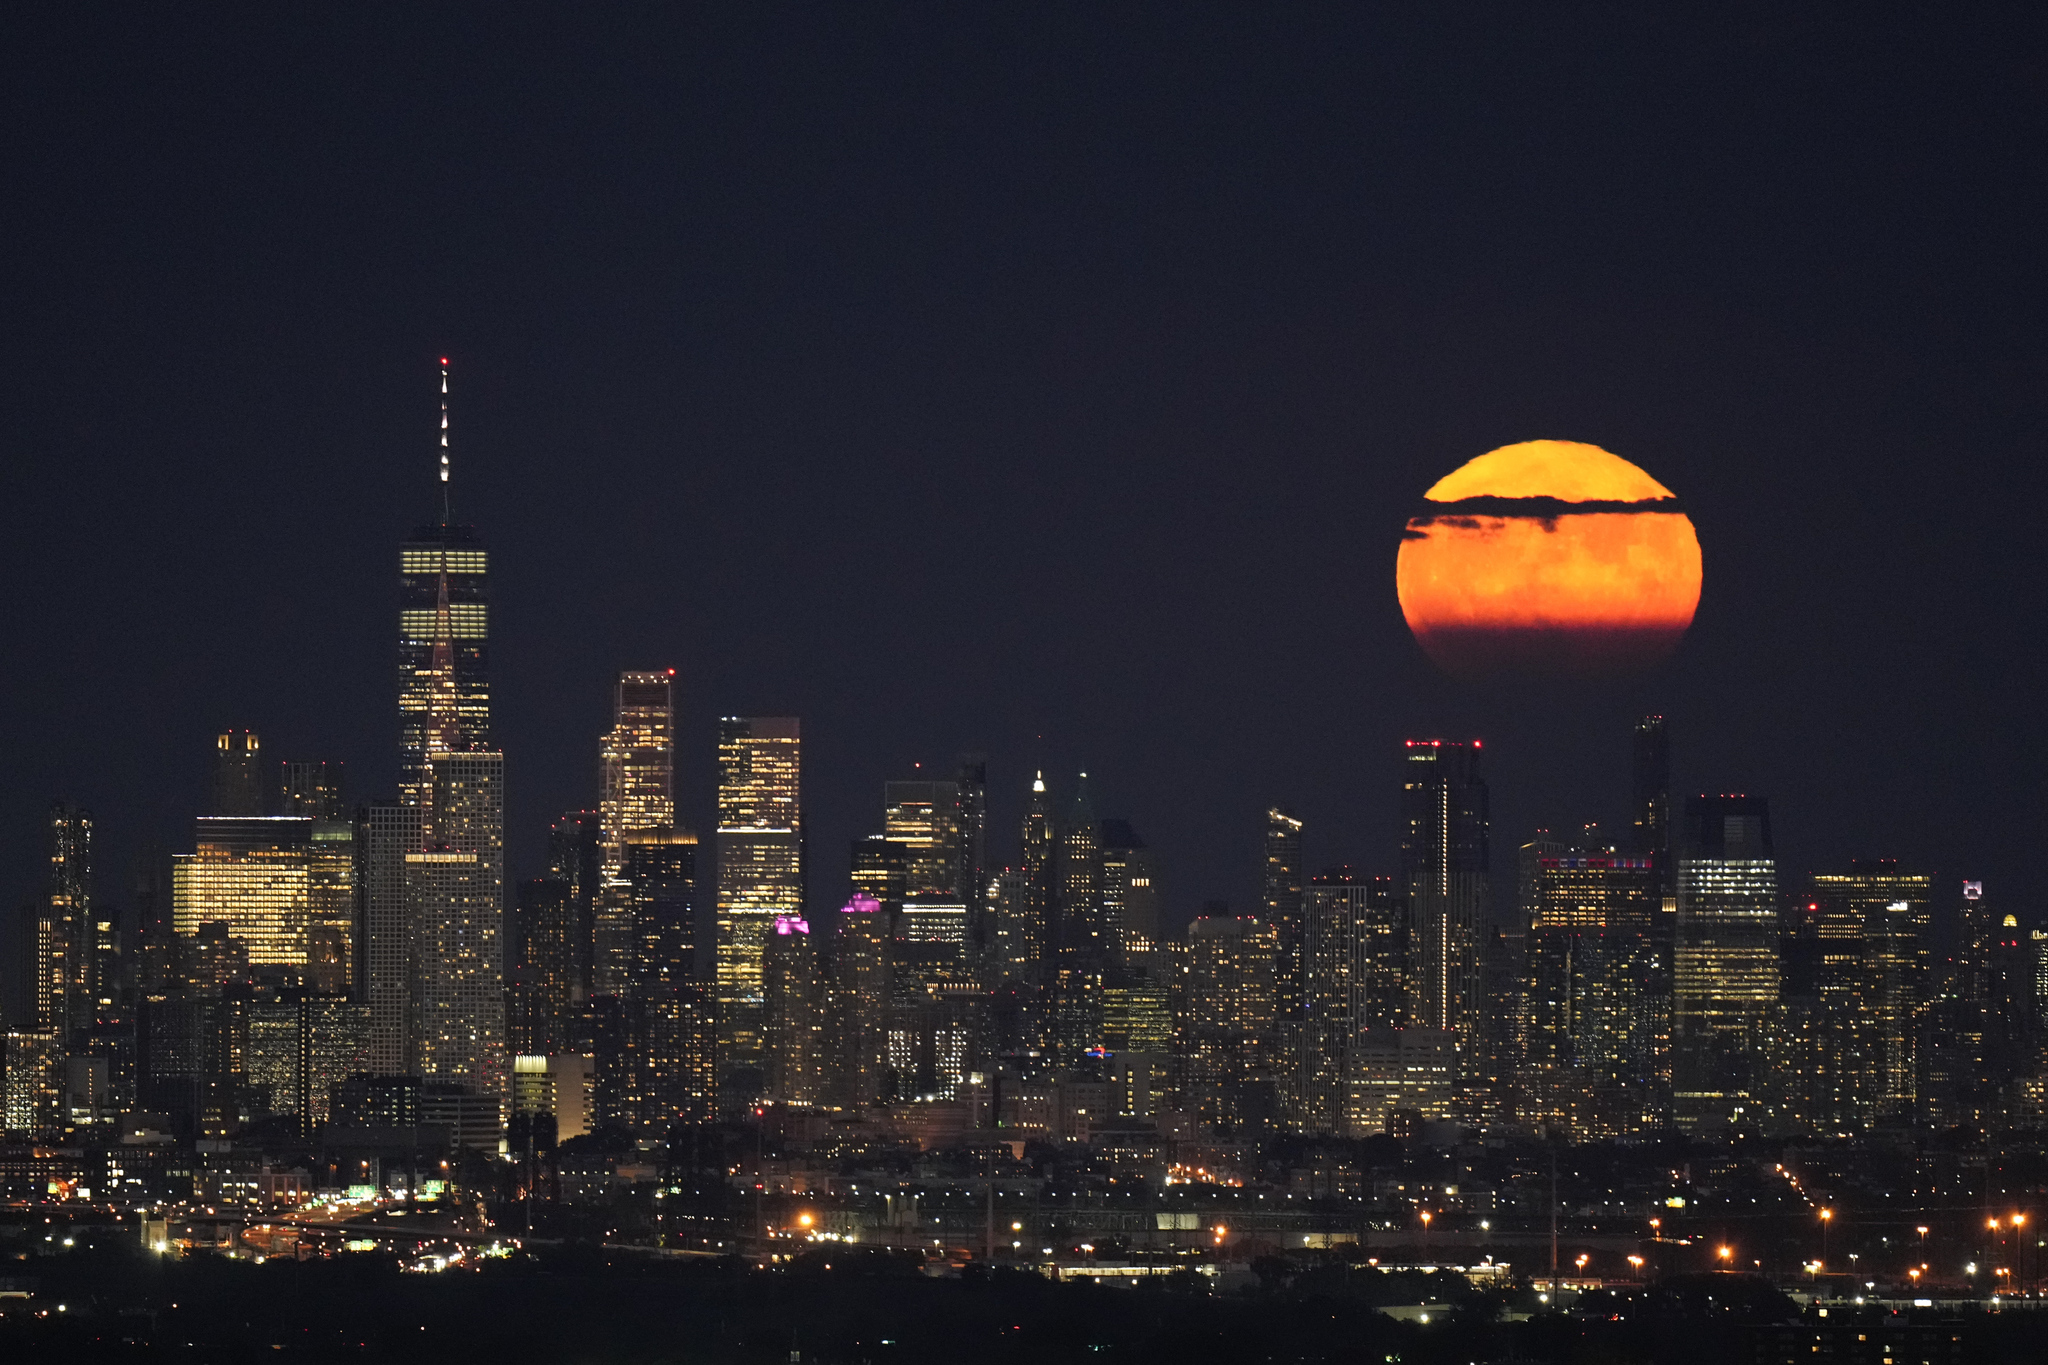 The moon rises through clouds over the skyline of lower Manhattan.